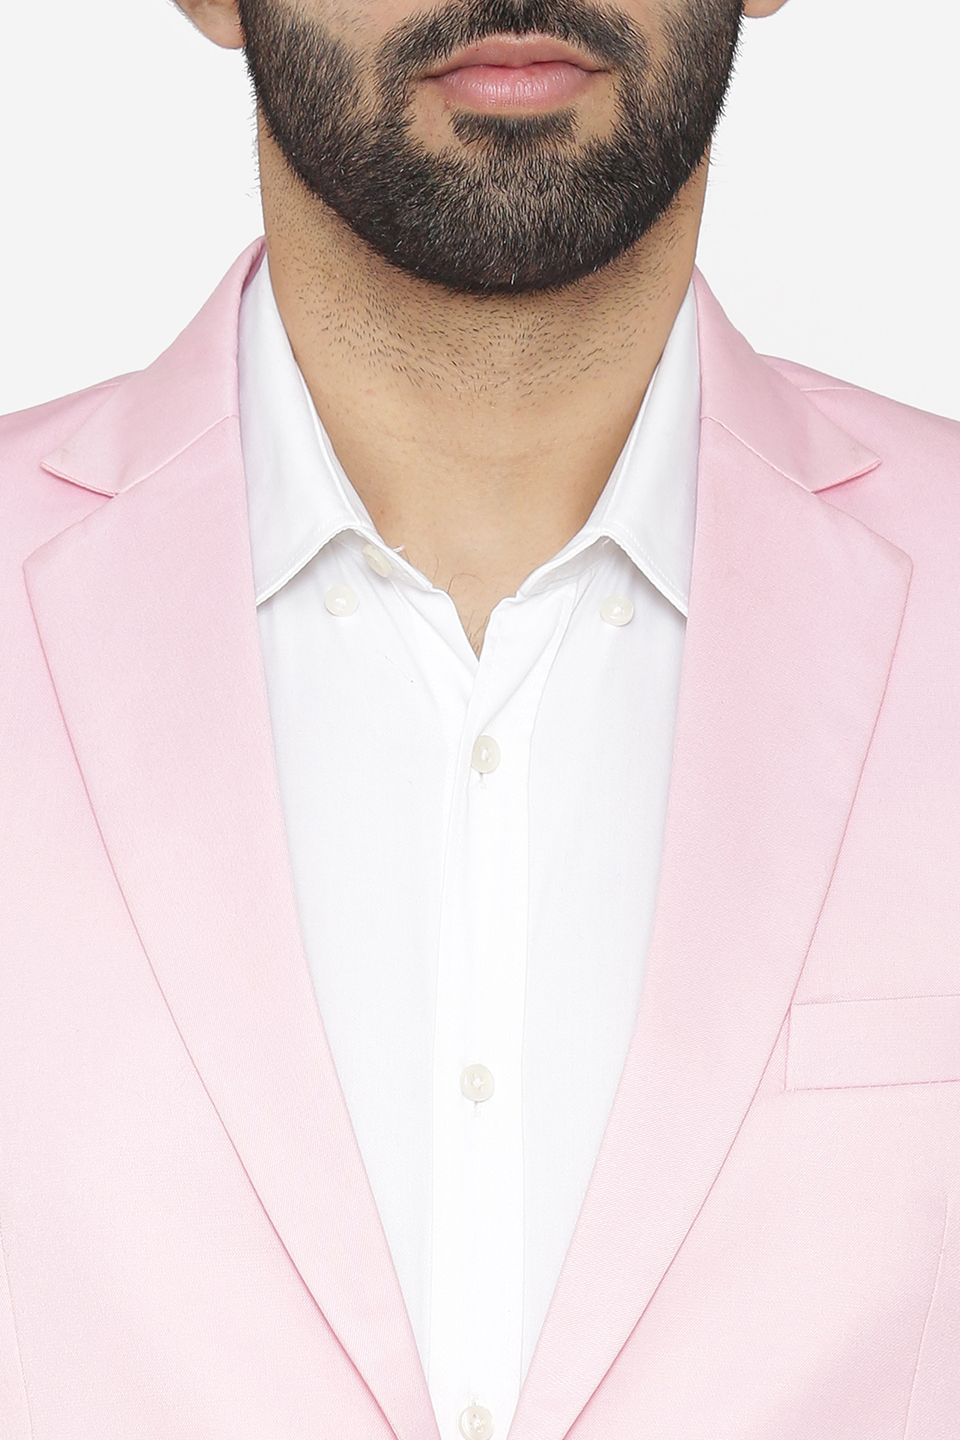 Polyester Cotton Pink Suit